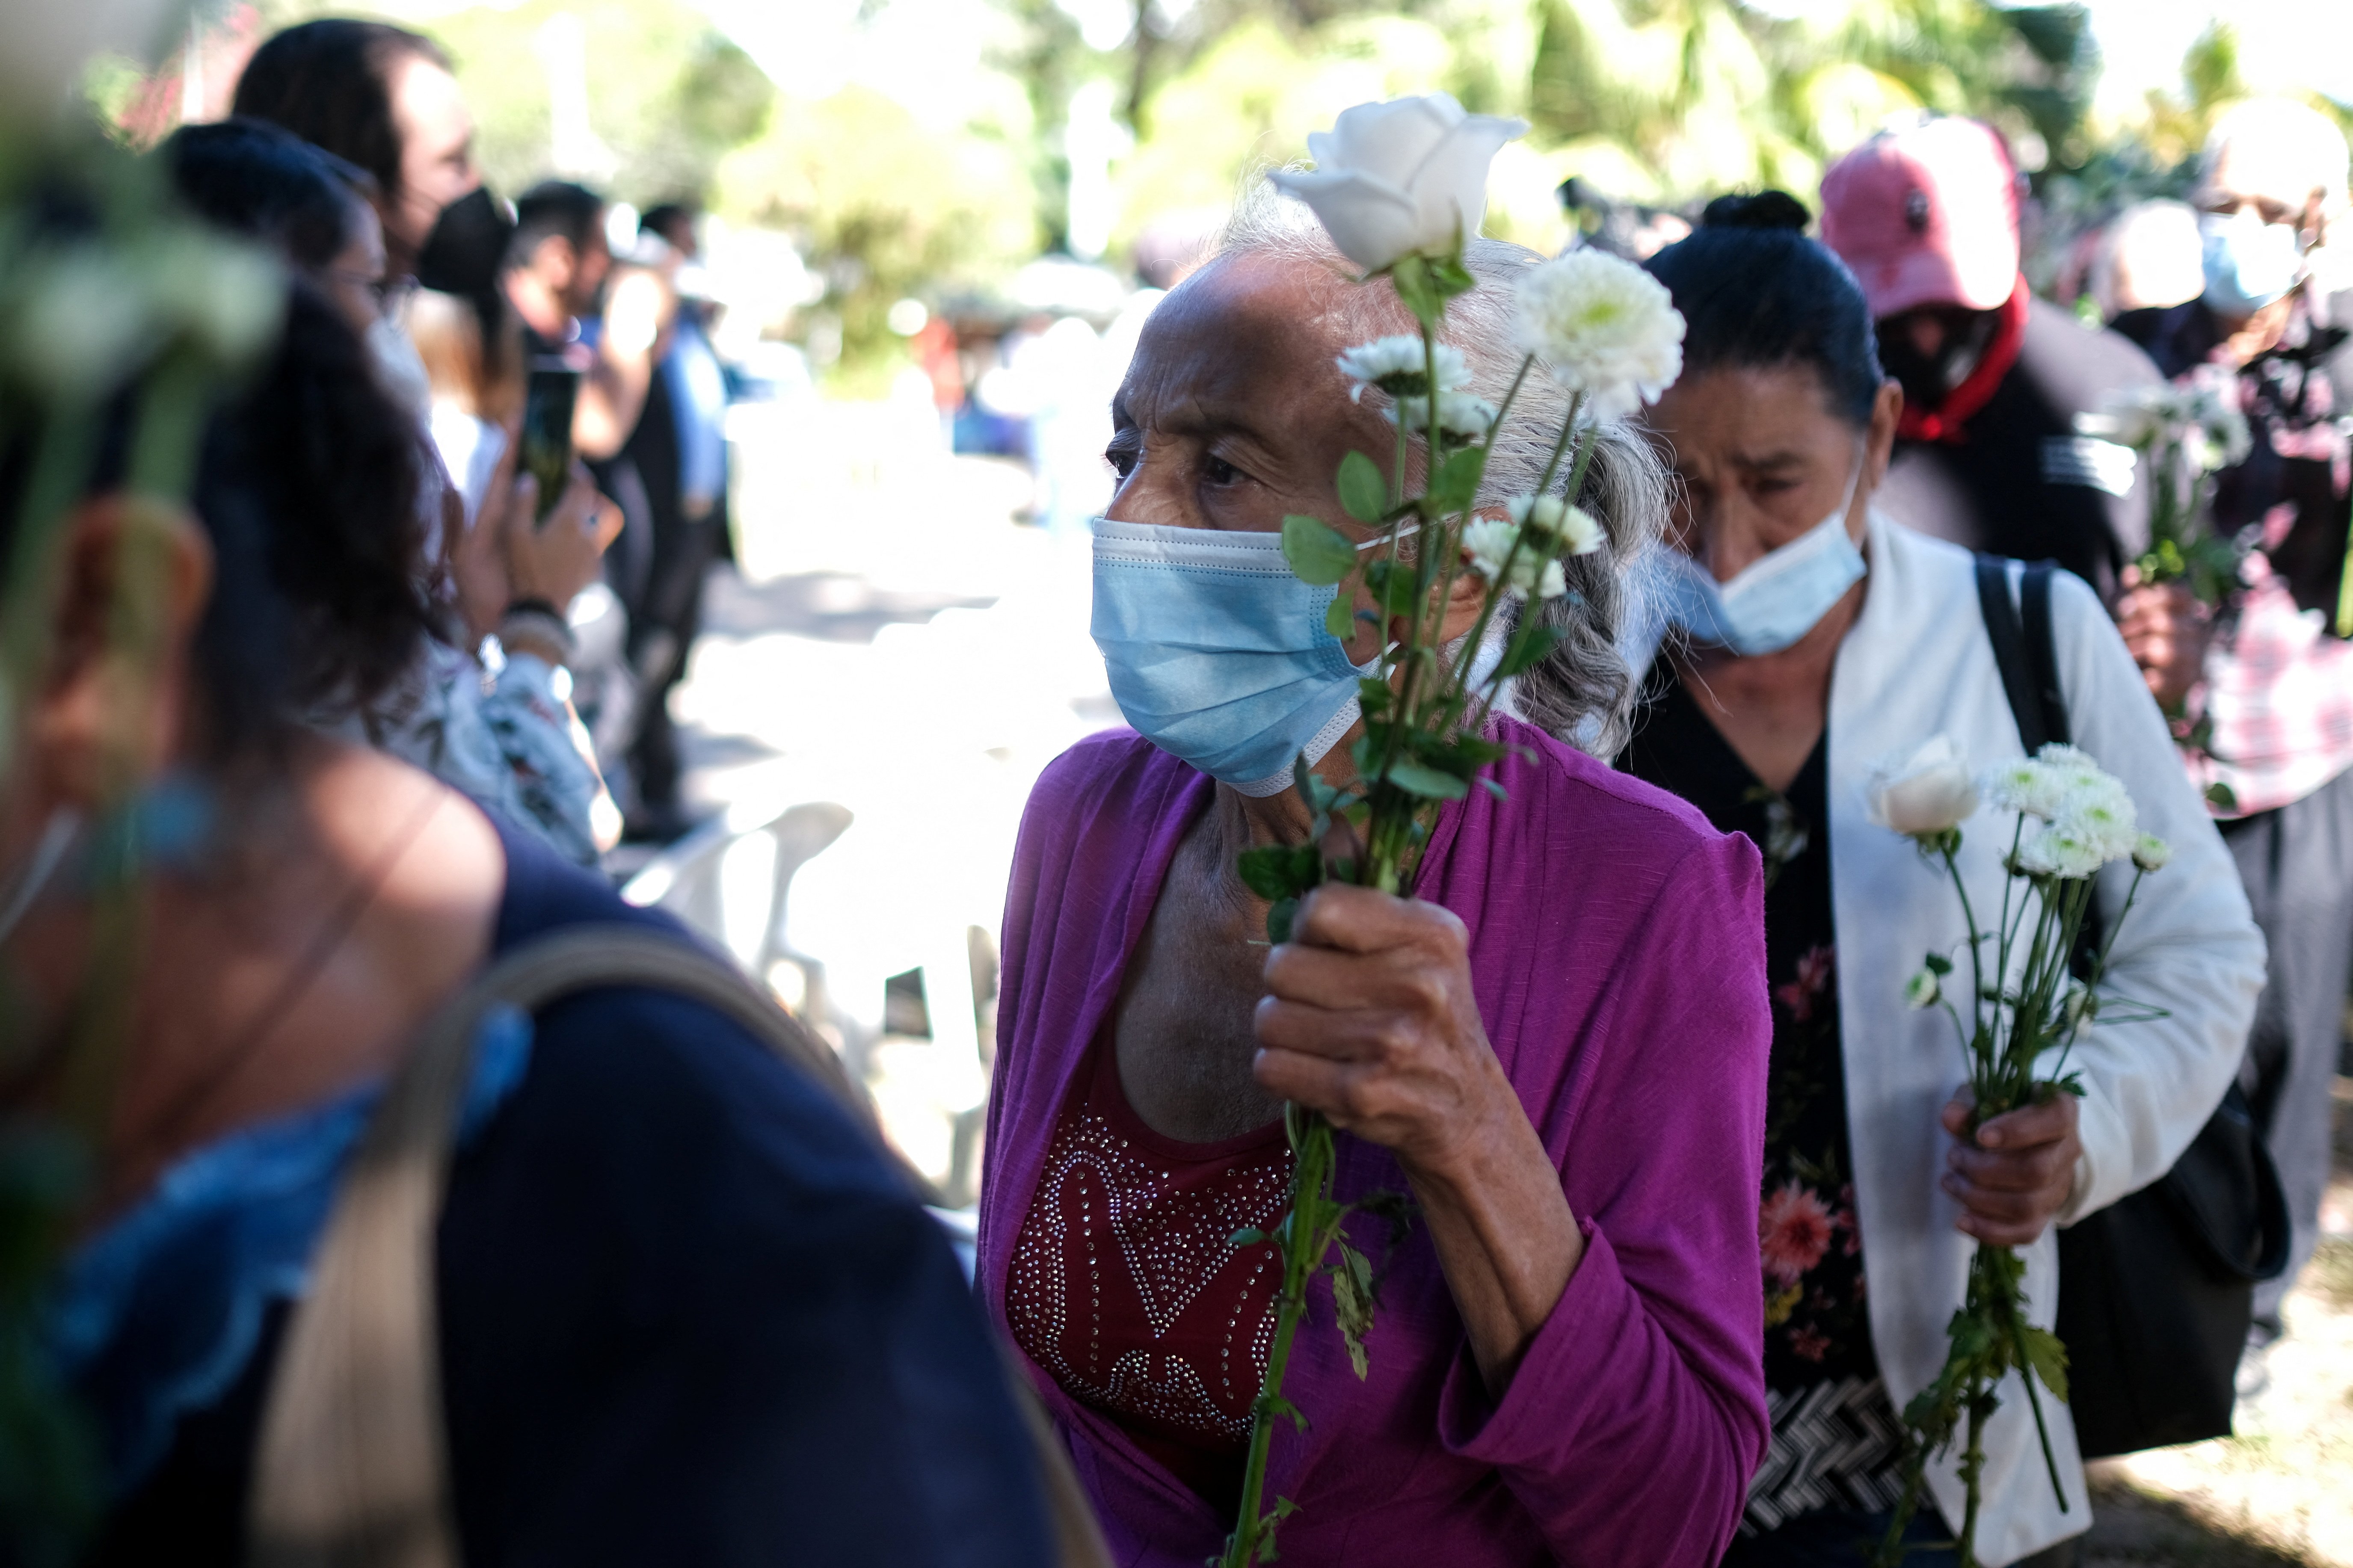 Women carry flowers as the arrive to take part in a ceremony to commemorate the 40th anniversary of the El Mozote massacre in El Salvador Dec. 11, 2021. (CNS photo/Jose Cabezas, Reuters)